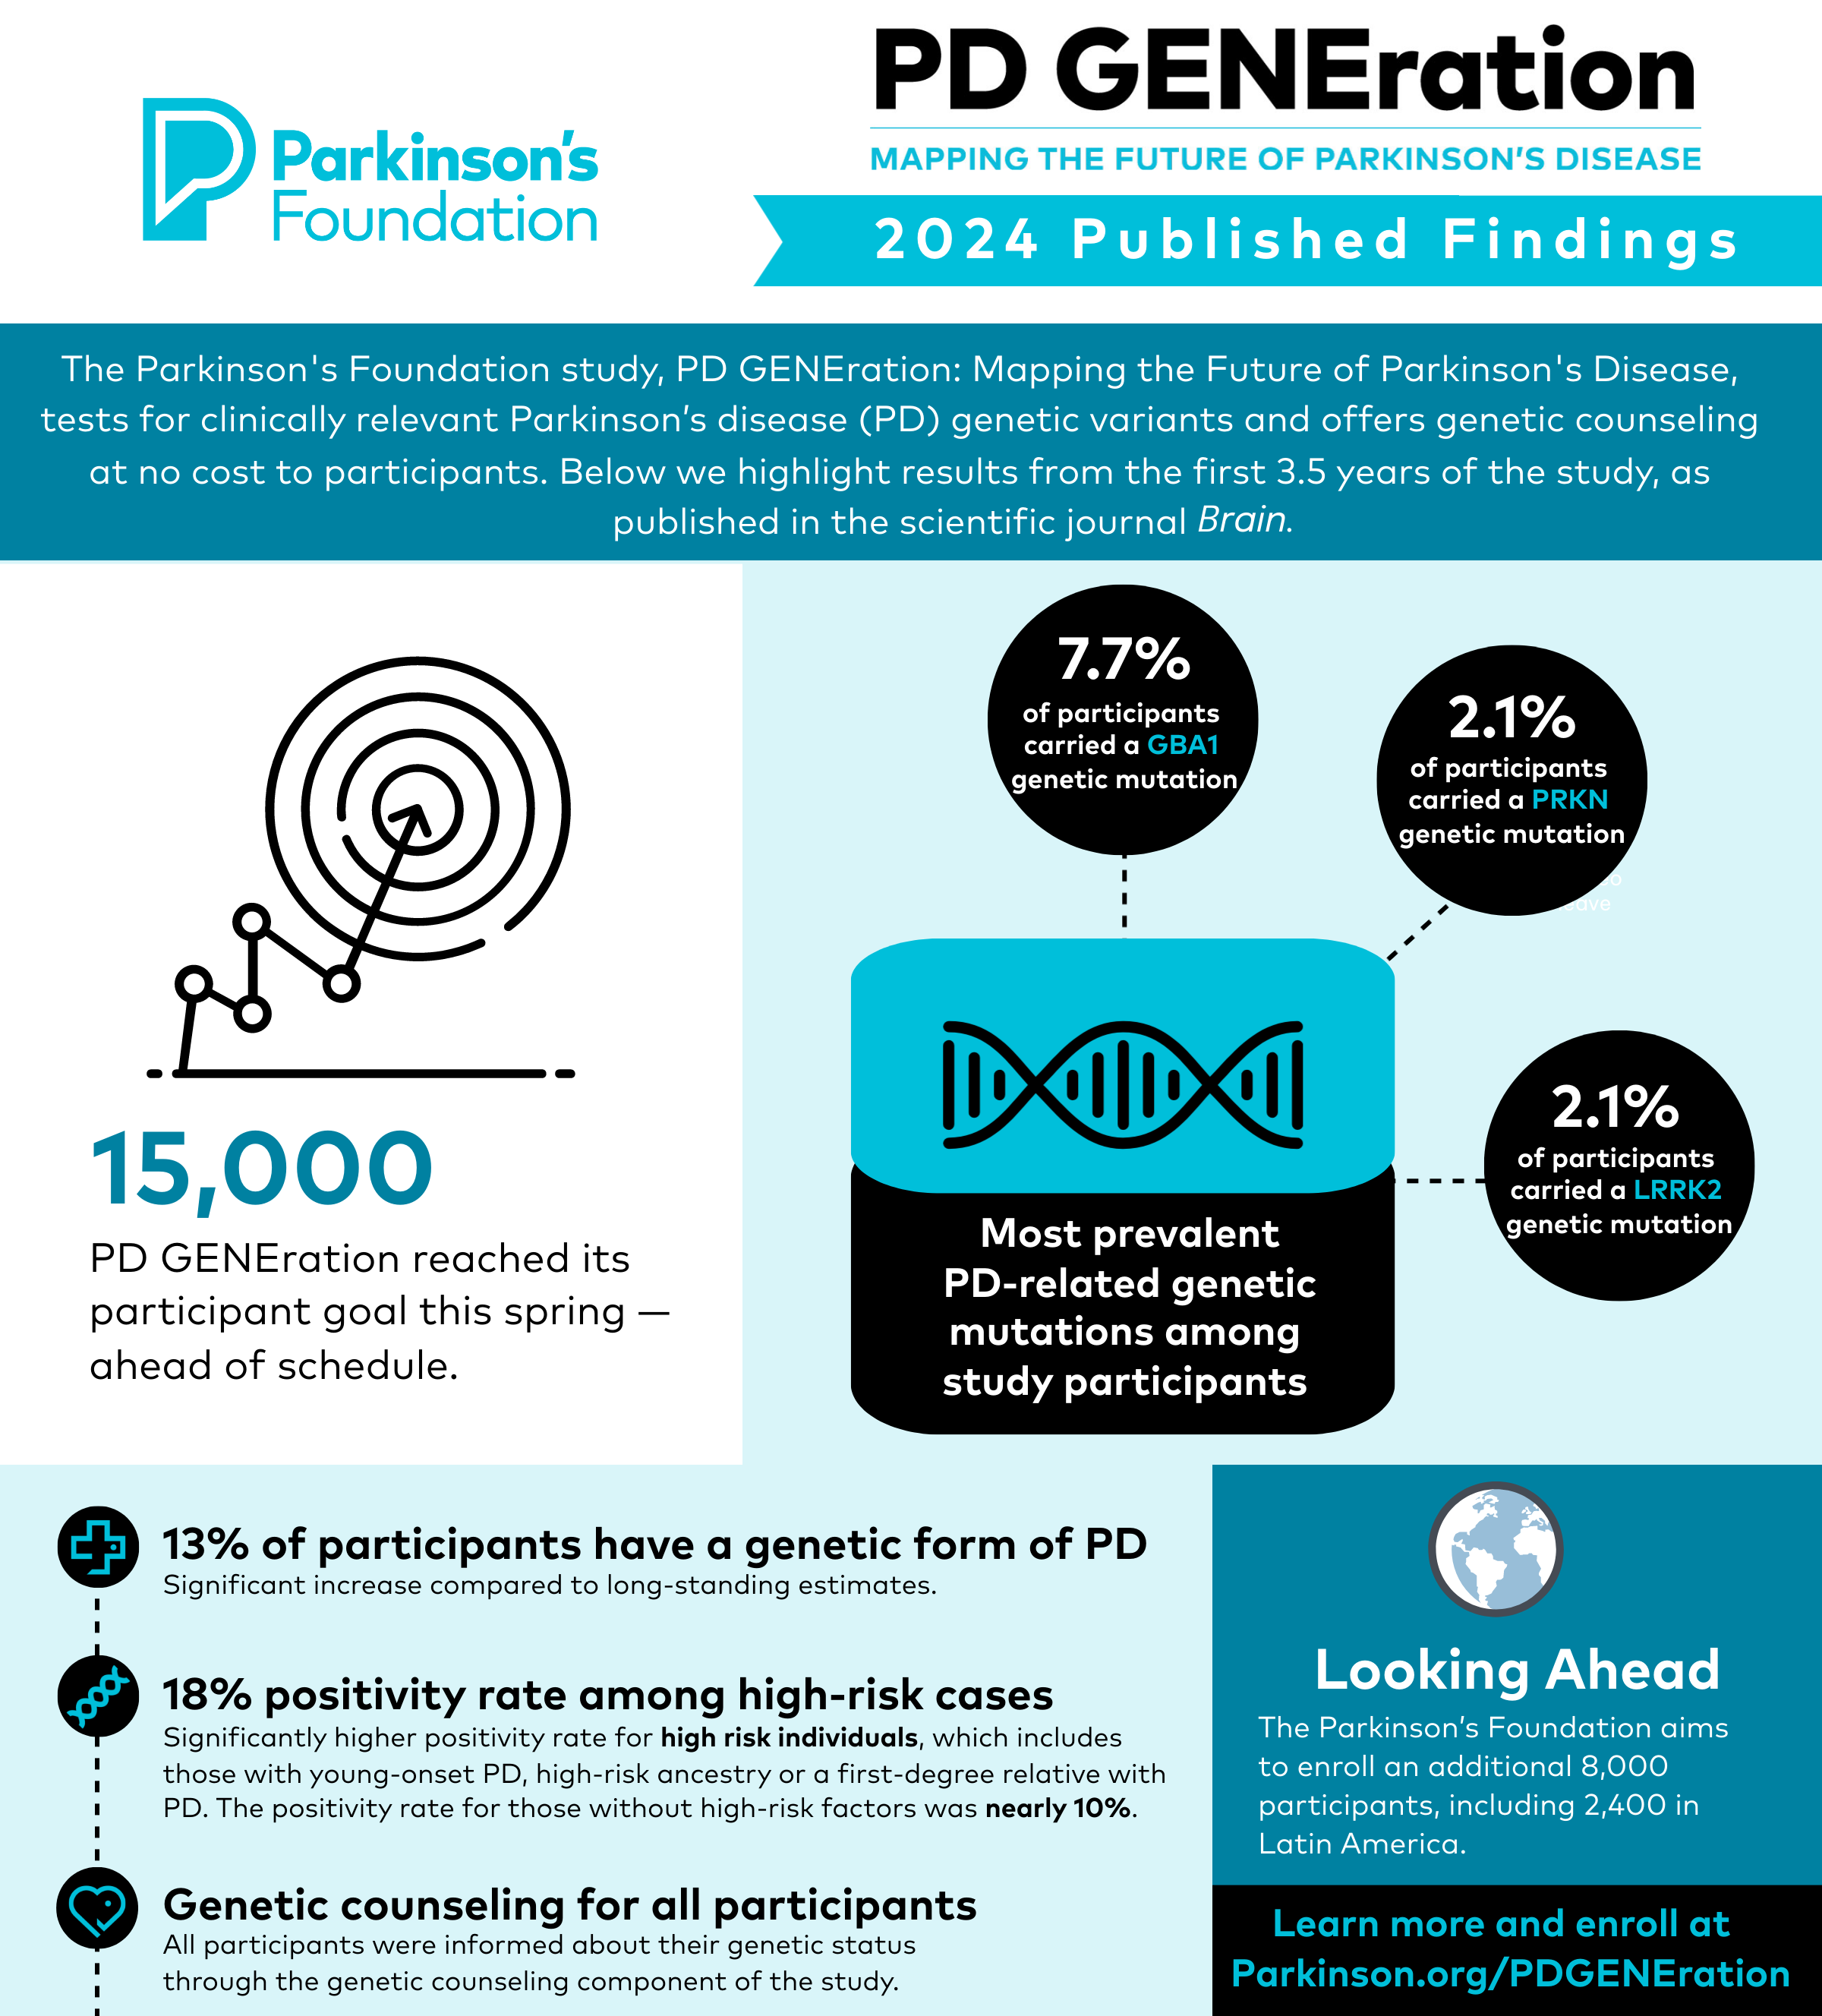 PD GENE 2024 findings infographic